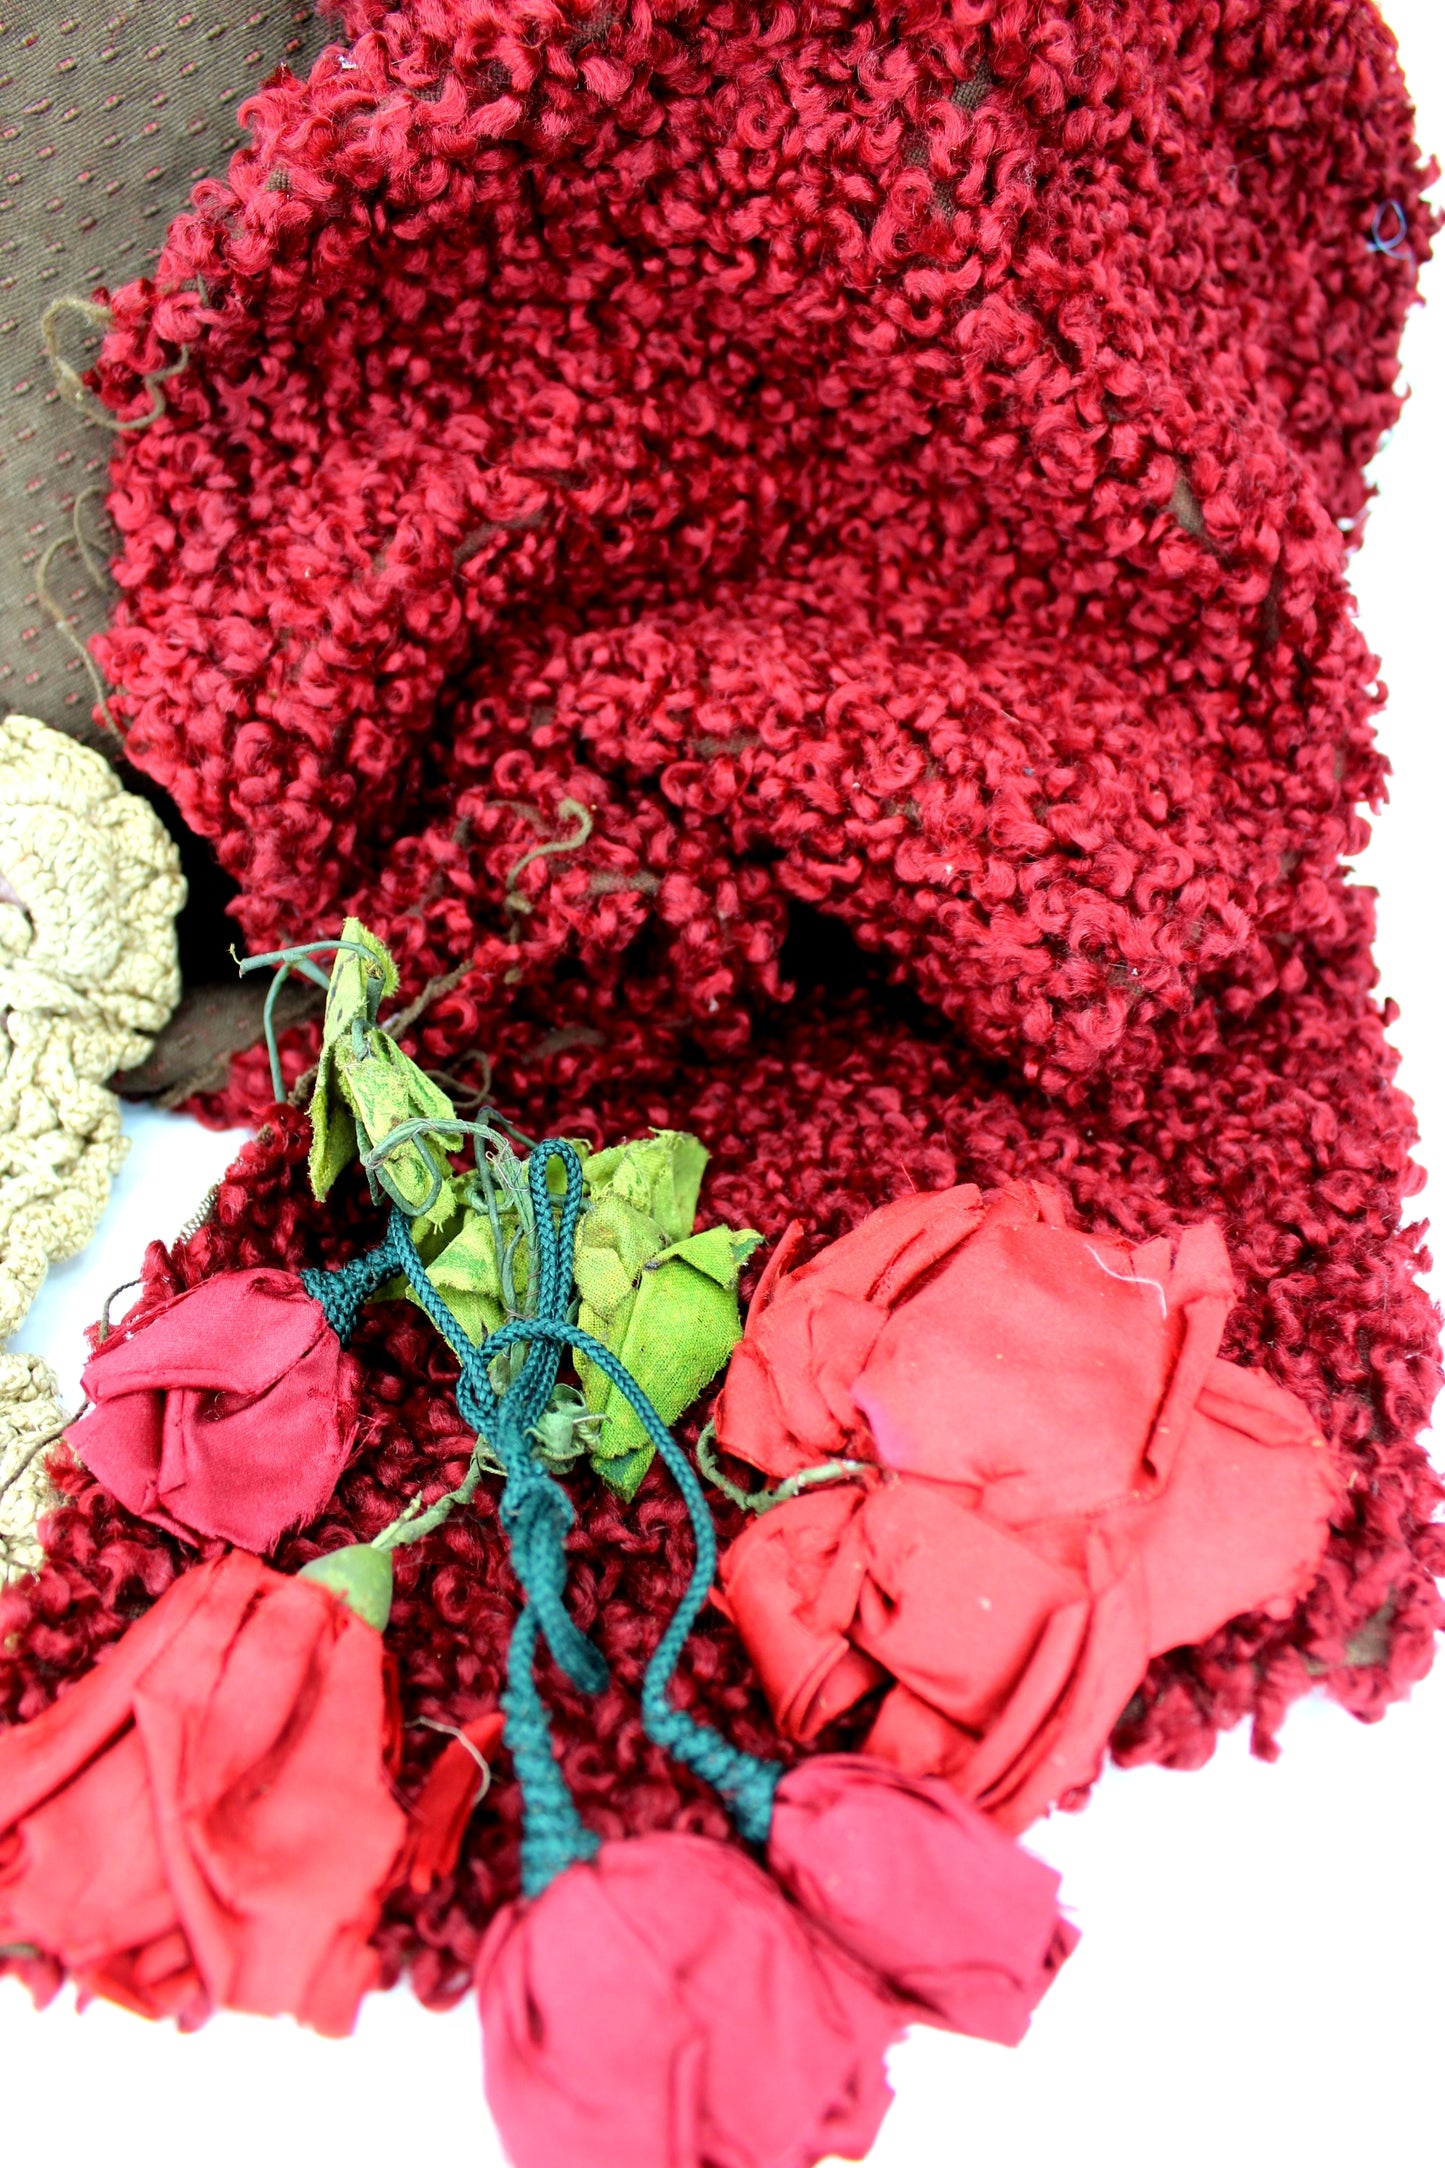 Victorian Antique Craft 2 Items - Red Curly Fabric & Unfinished Crochet Purse doll clothes